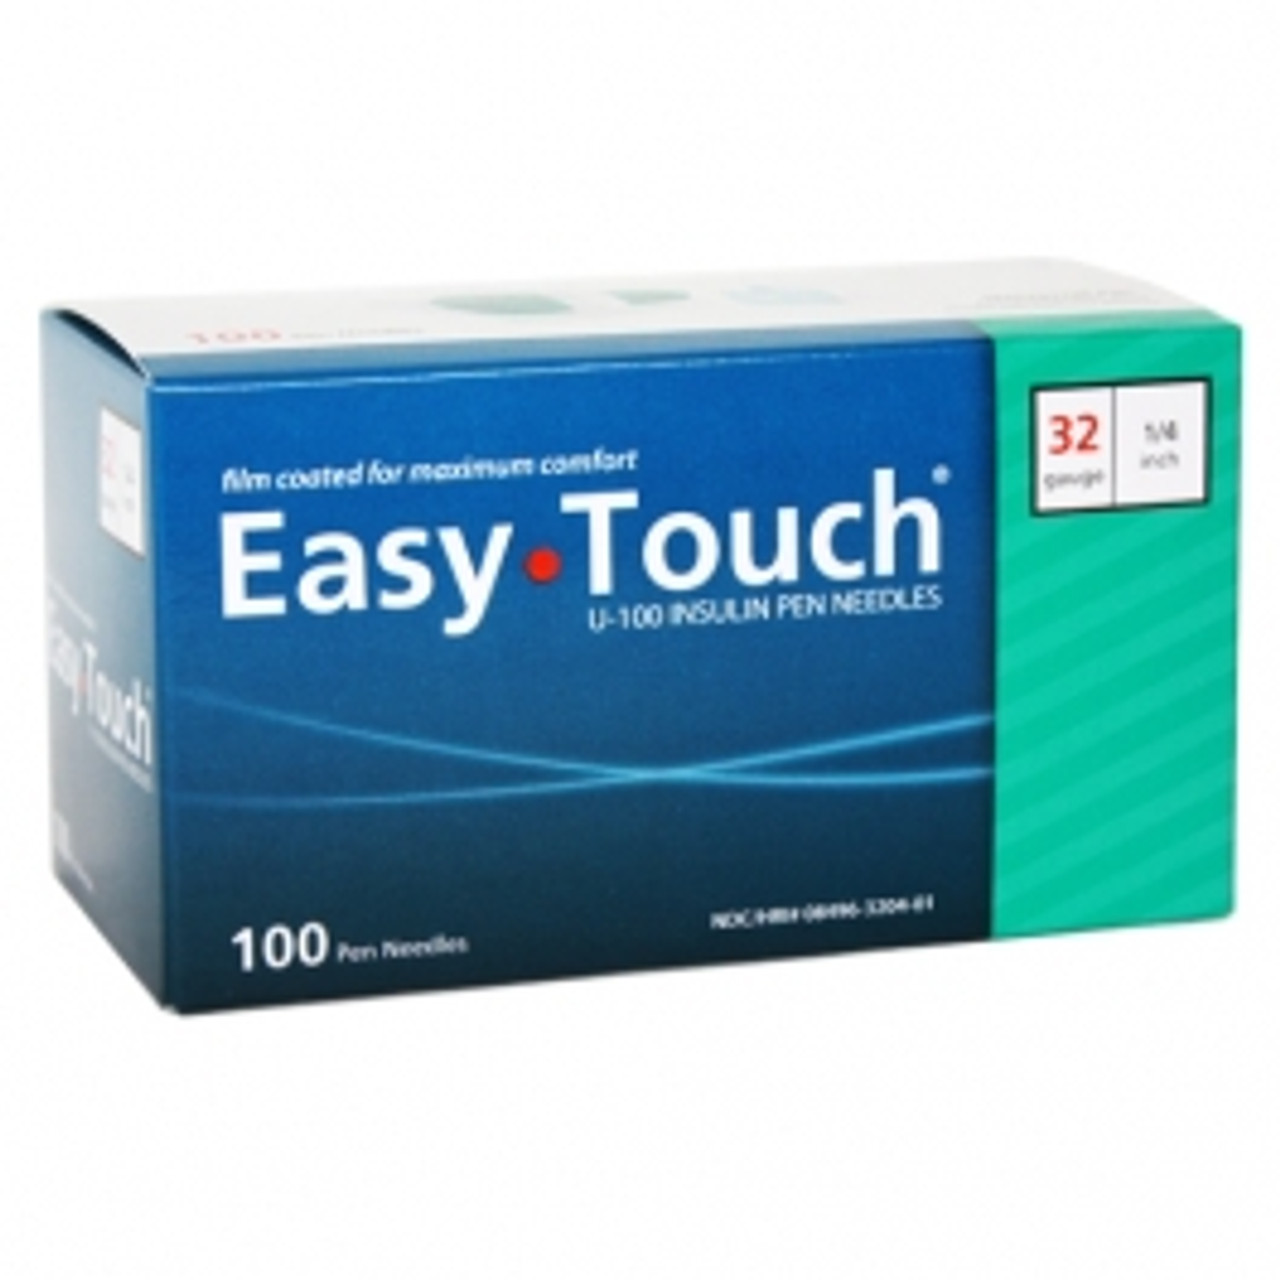 Buy Easy Touch Pen Needles 32g, 5/32 Inch (4mm) on